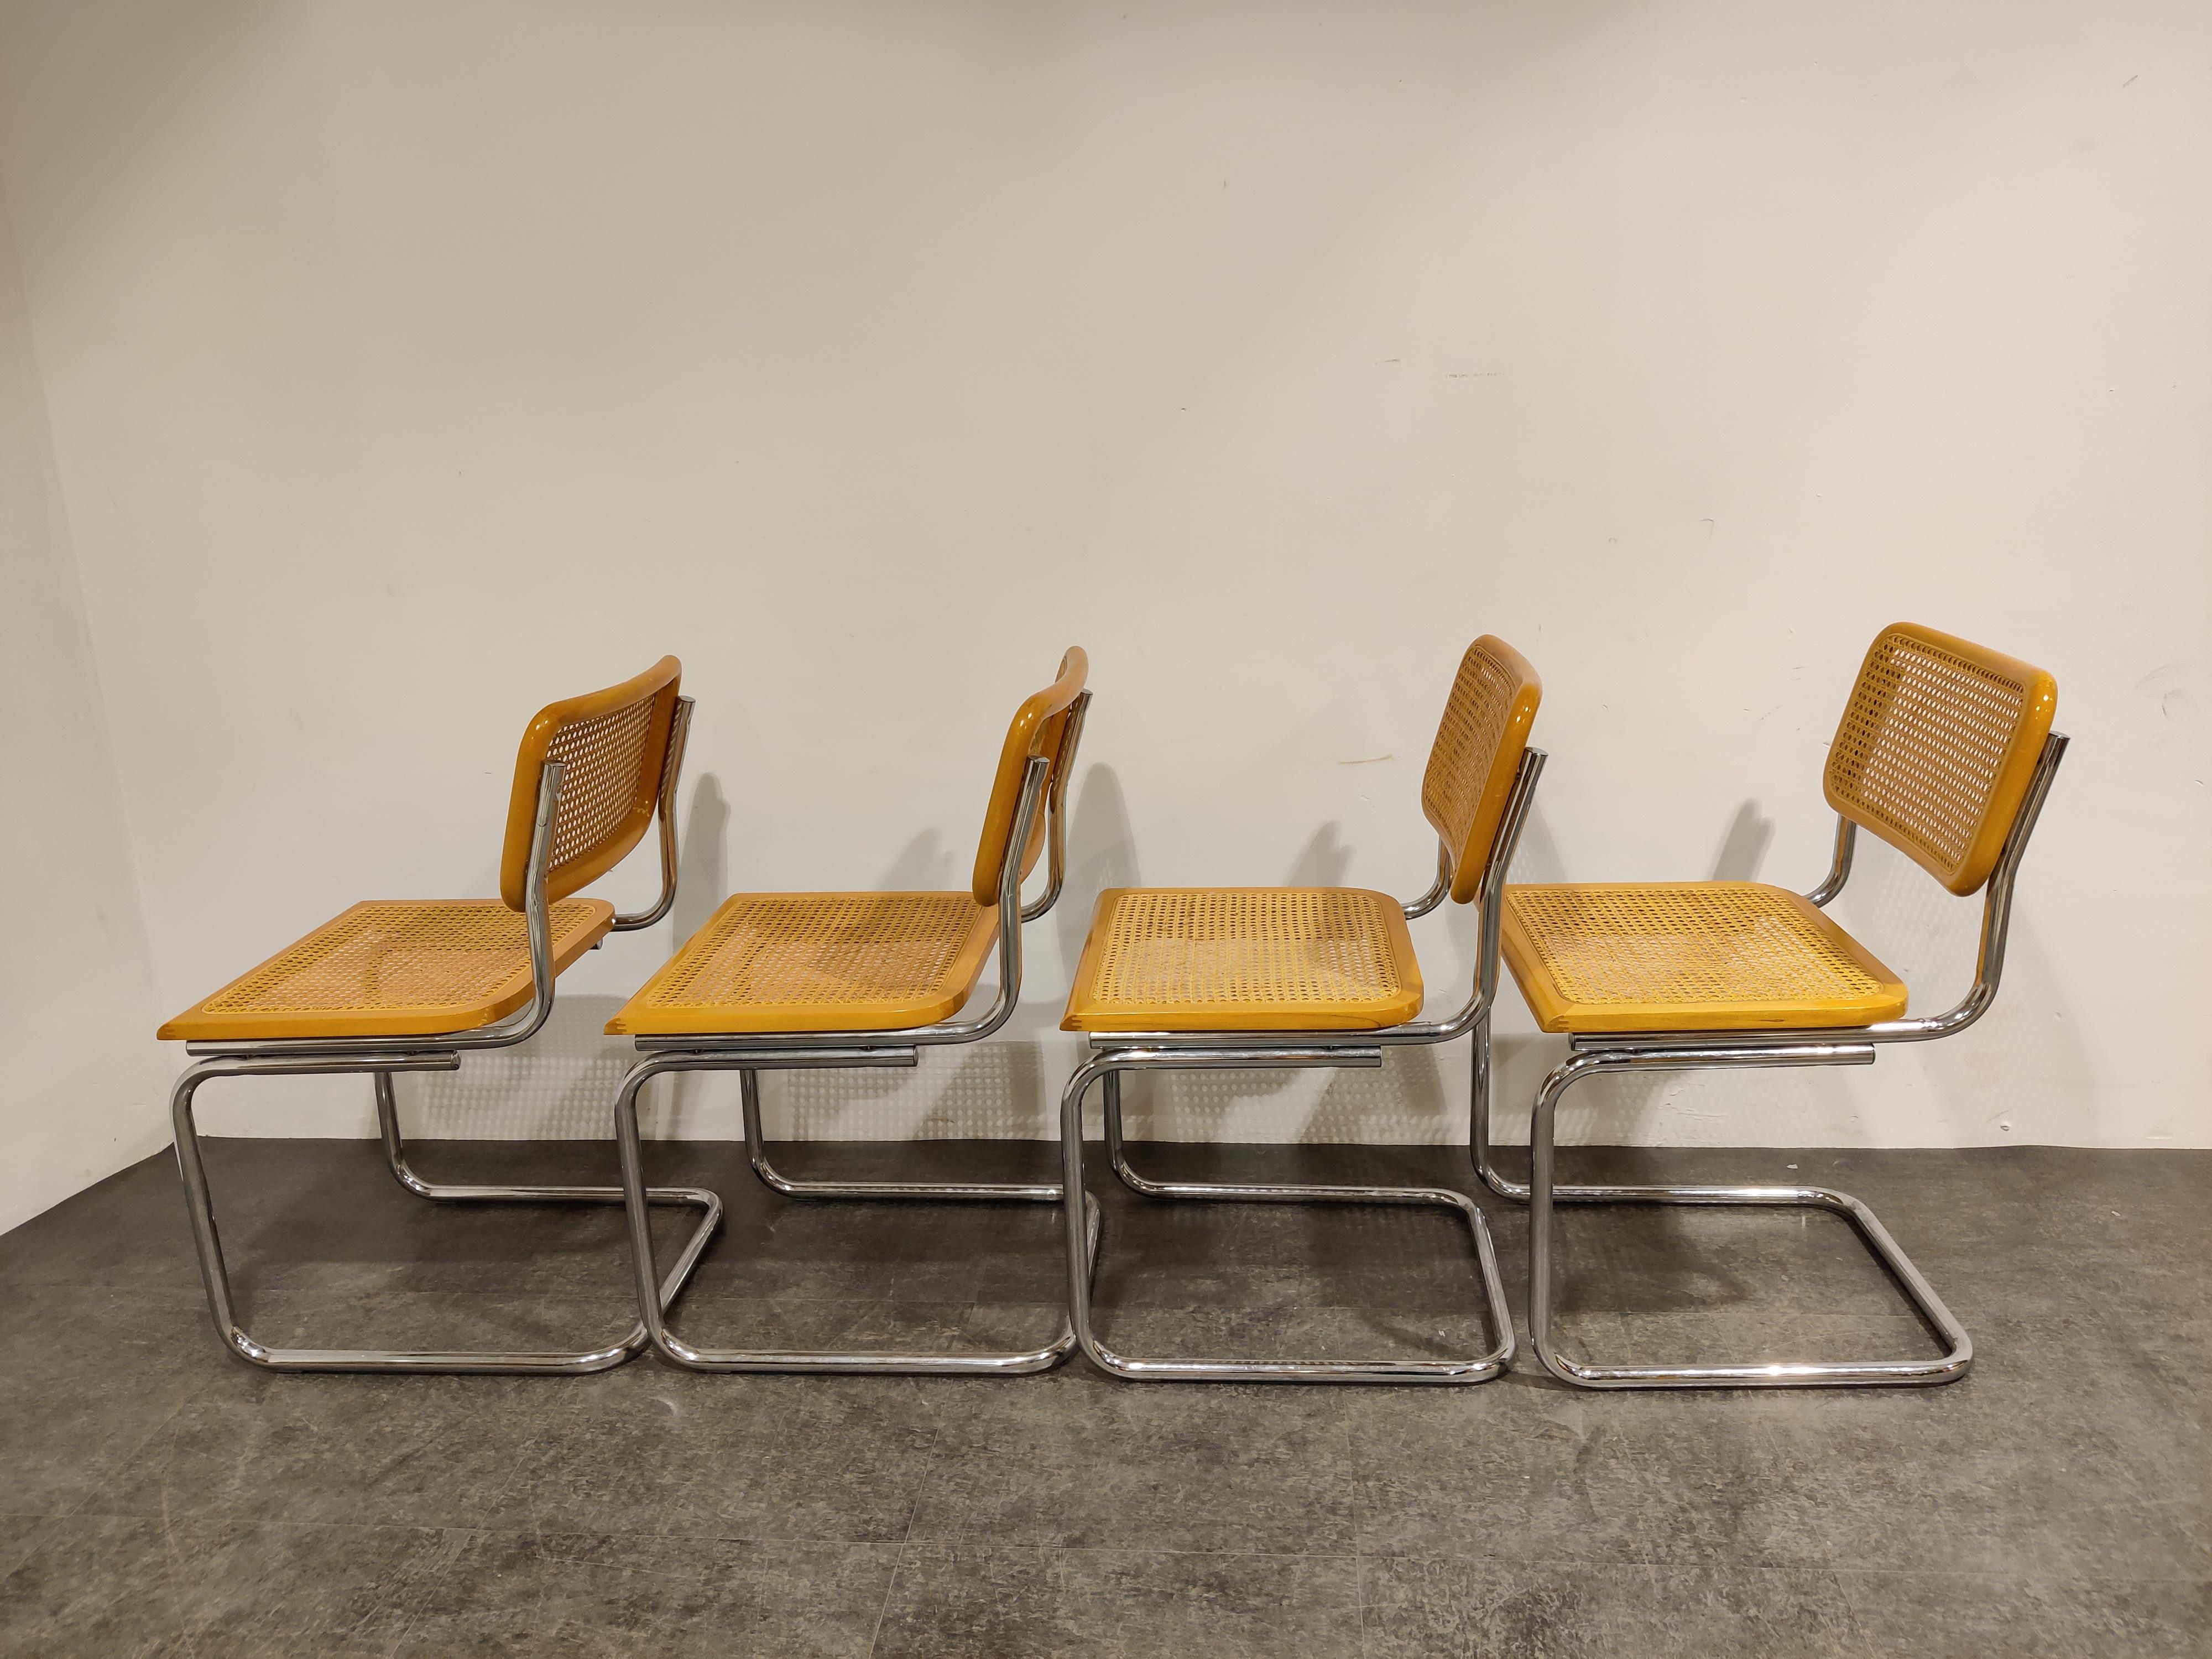 Italian Set of 4 Vintage Marcel Breuer Style Cesca Chairs, Made in Italy, 1970s